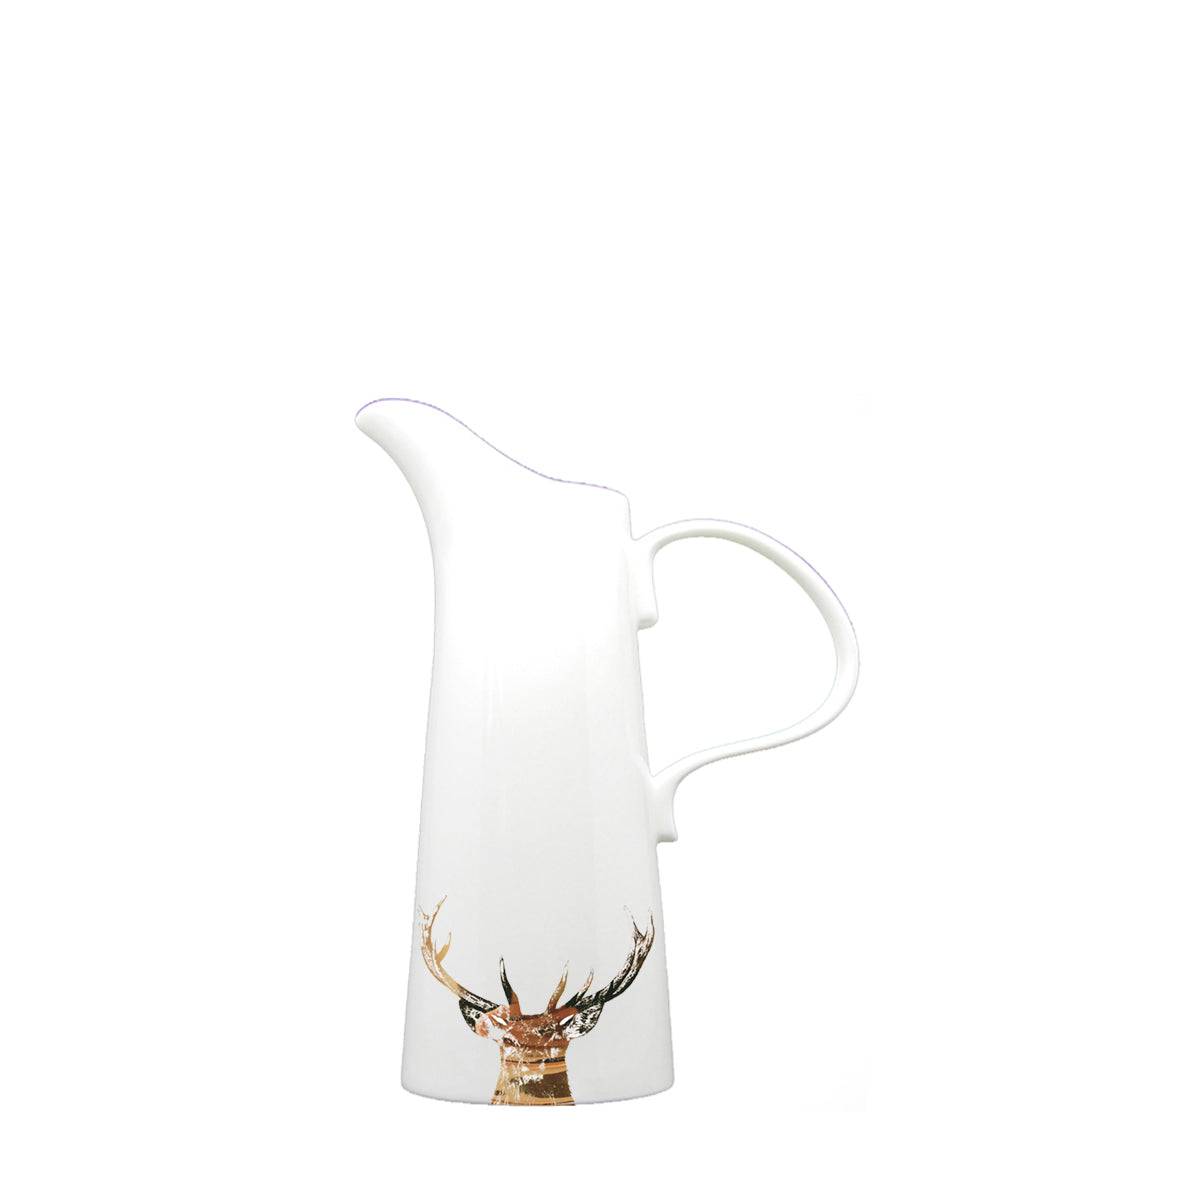 Gold Majestic Stag Jug - Medium for sale - Woodcock and Cavendish